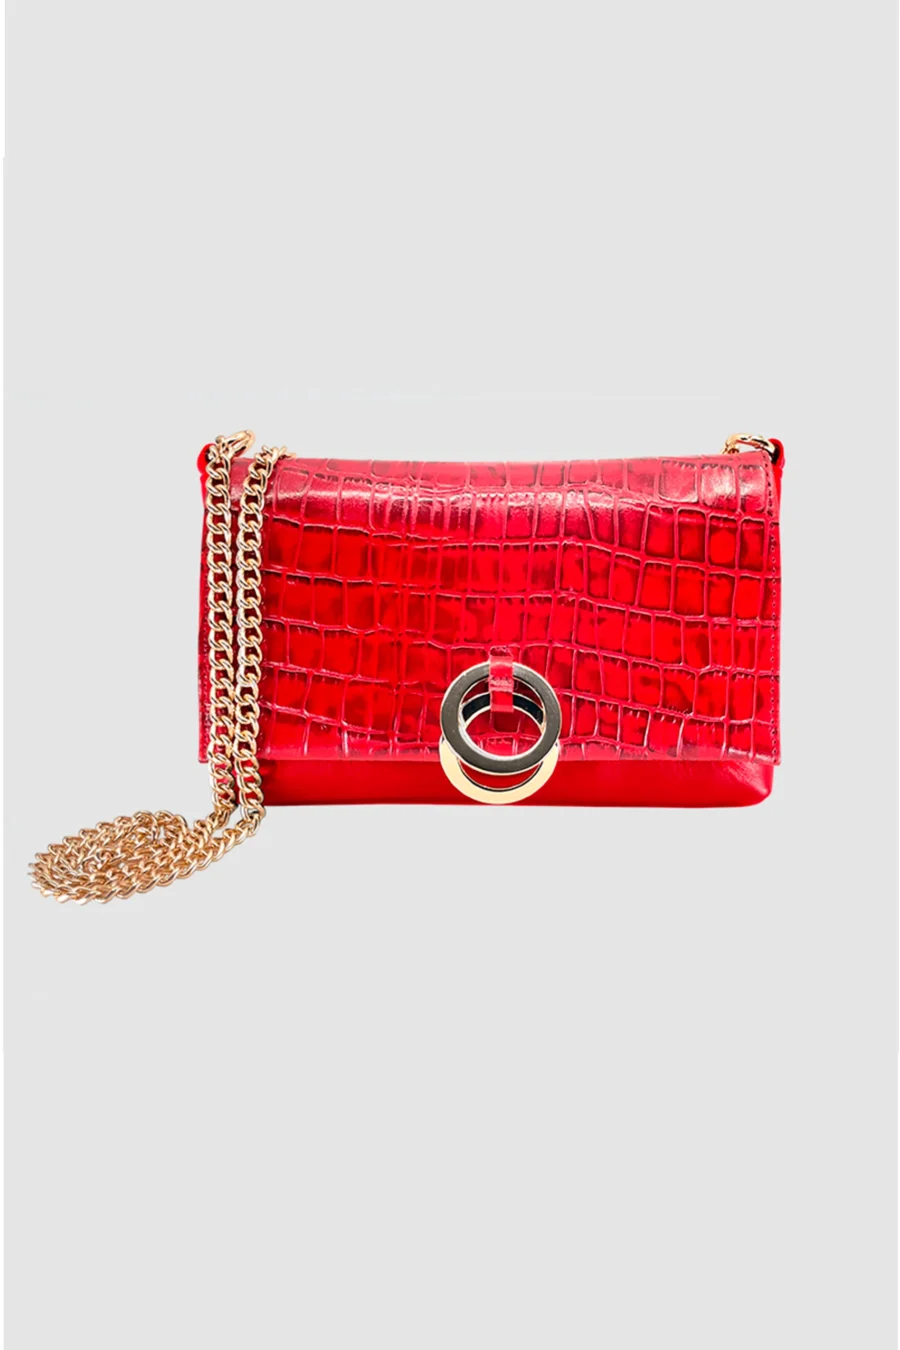 The Clutch Asteria 2ble Red